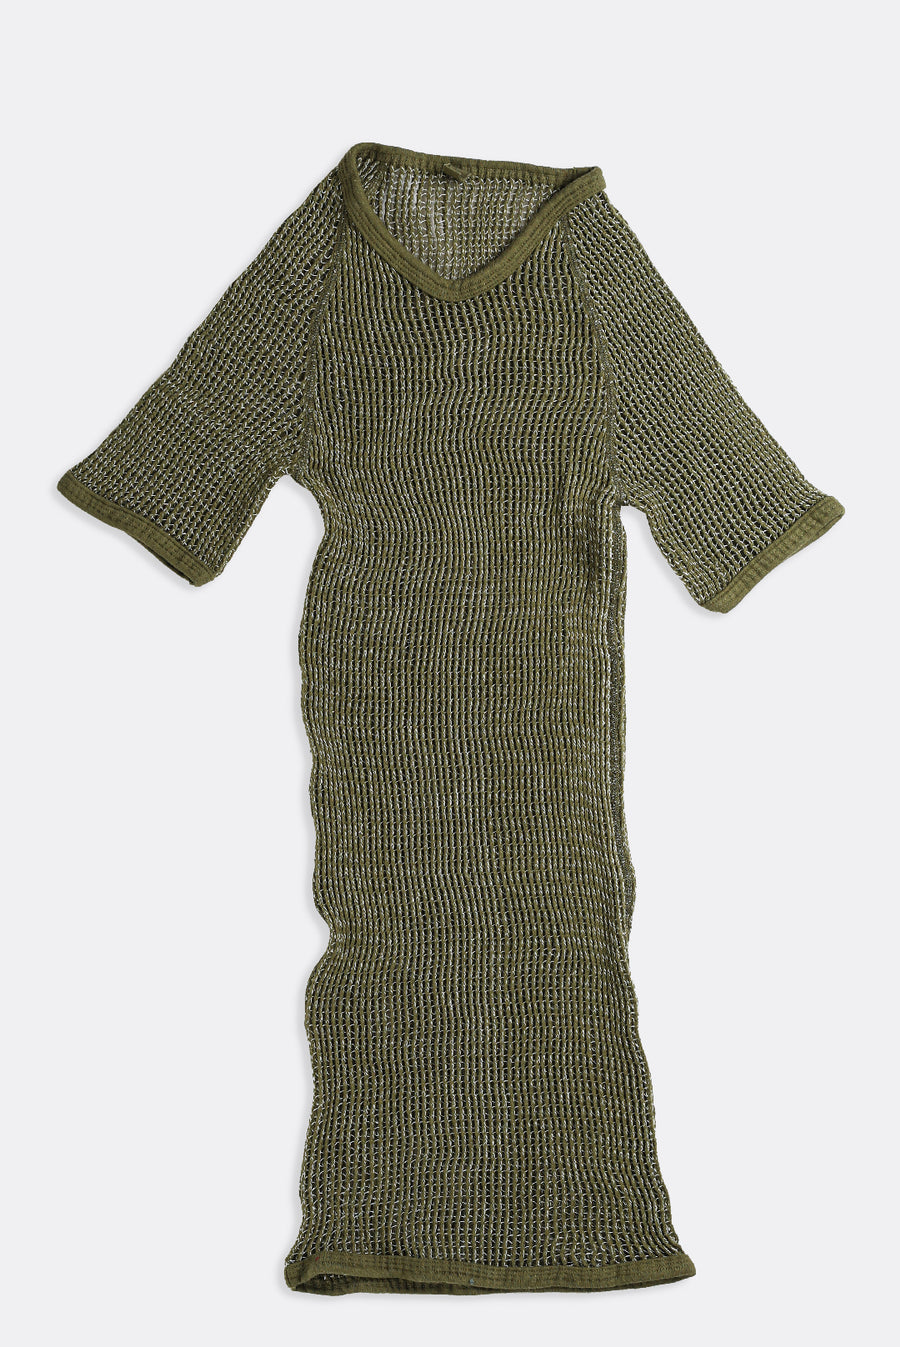 Vintage Knitted Shirt - Brown, White, Tan, Olive, Dark Green, Charcoal